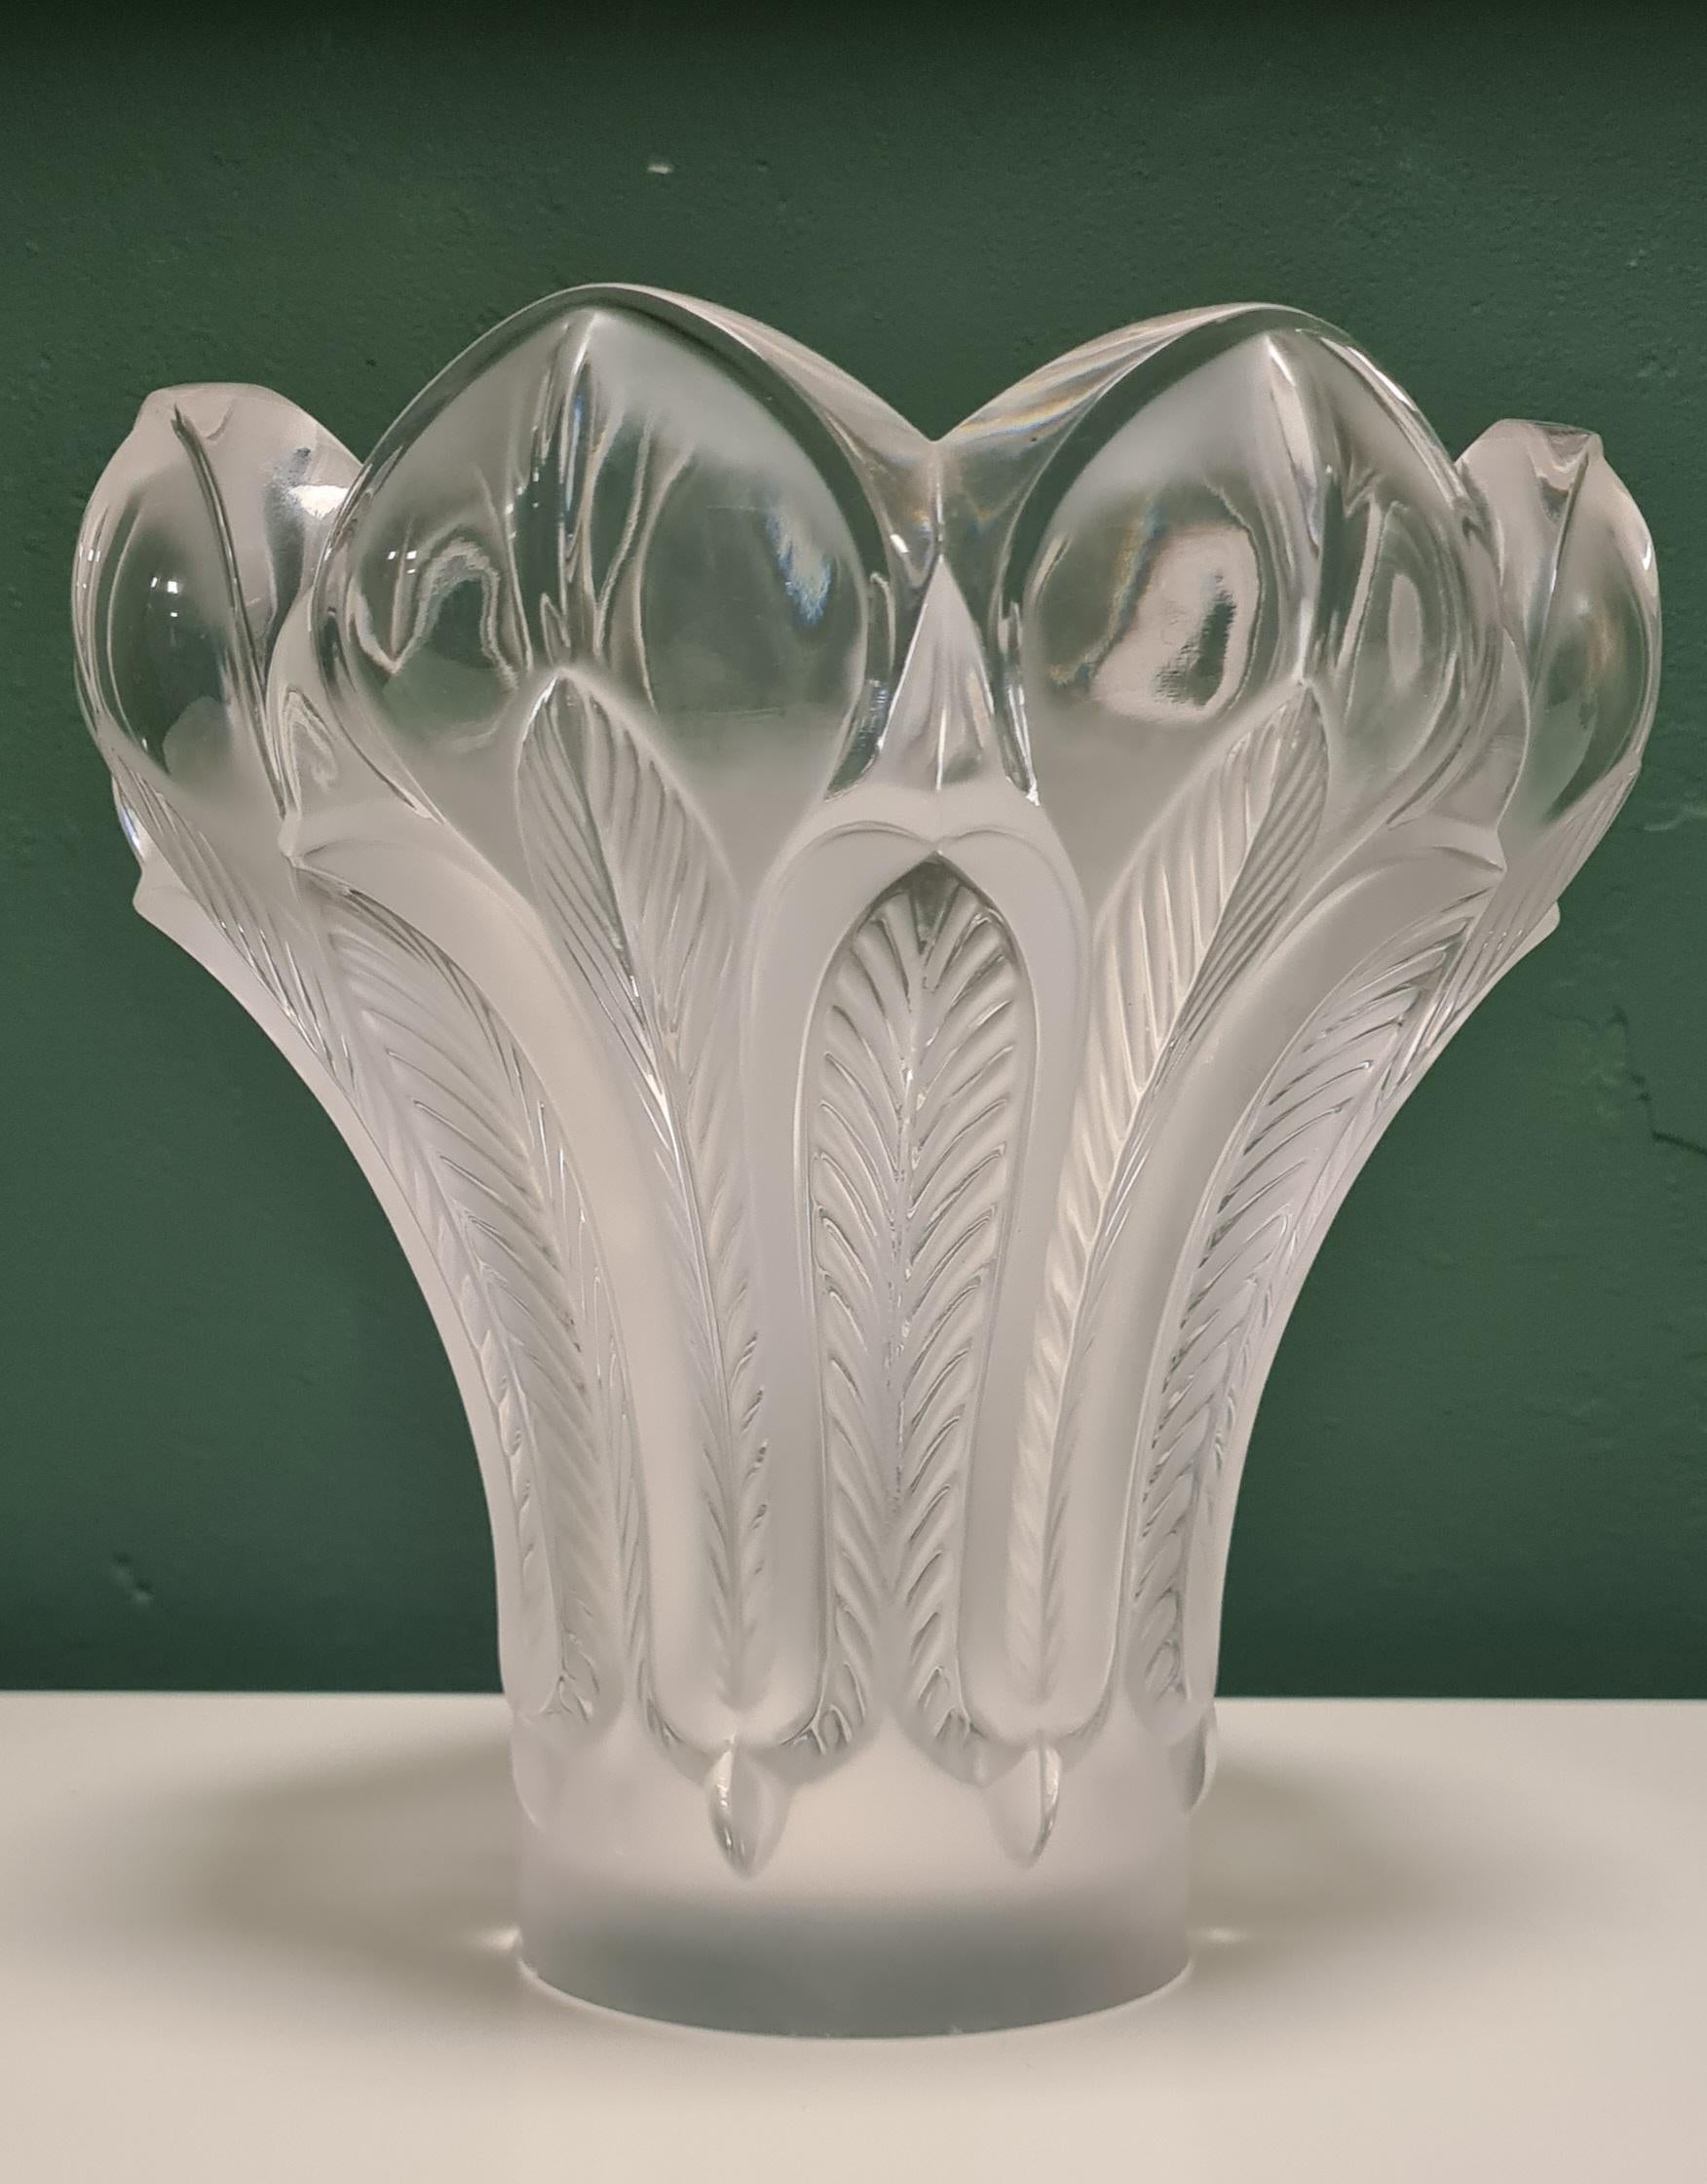 Vase created by the Lalique glassworks.

Made in 1985 to commemorate the 125th anniversary of Rène Lalique's birth.

It has transparent parts alternated with stylized, satiny feathers that give the vase the shape of an open flower.

The vase is